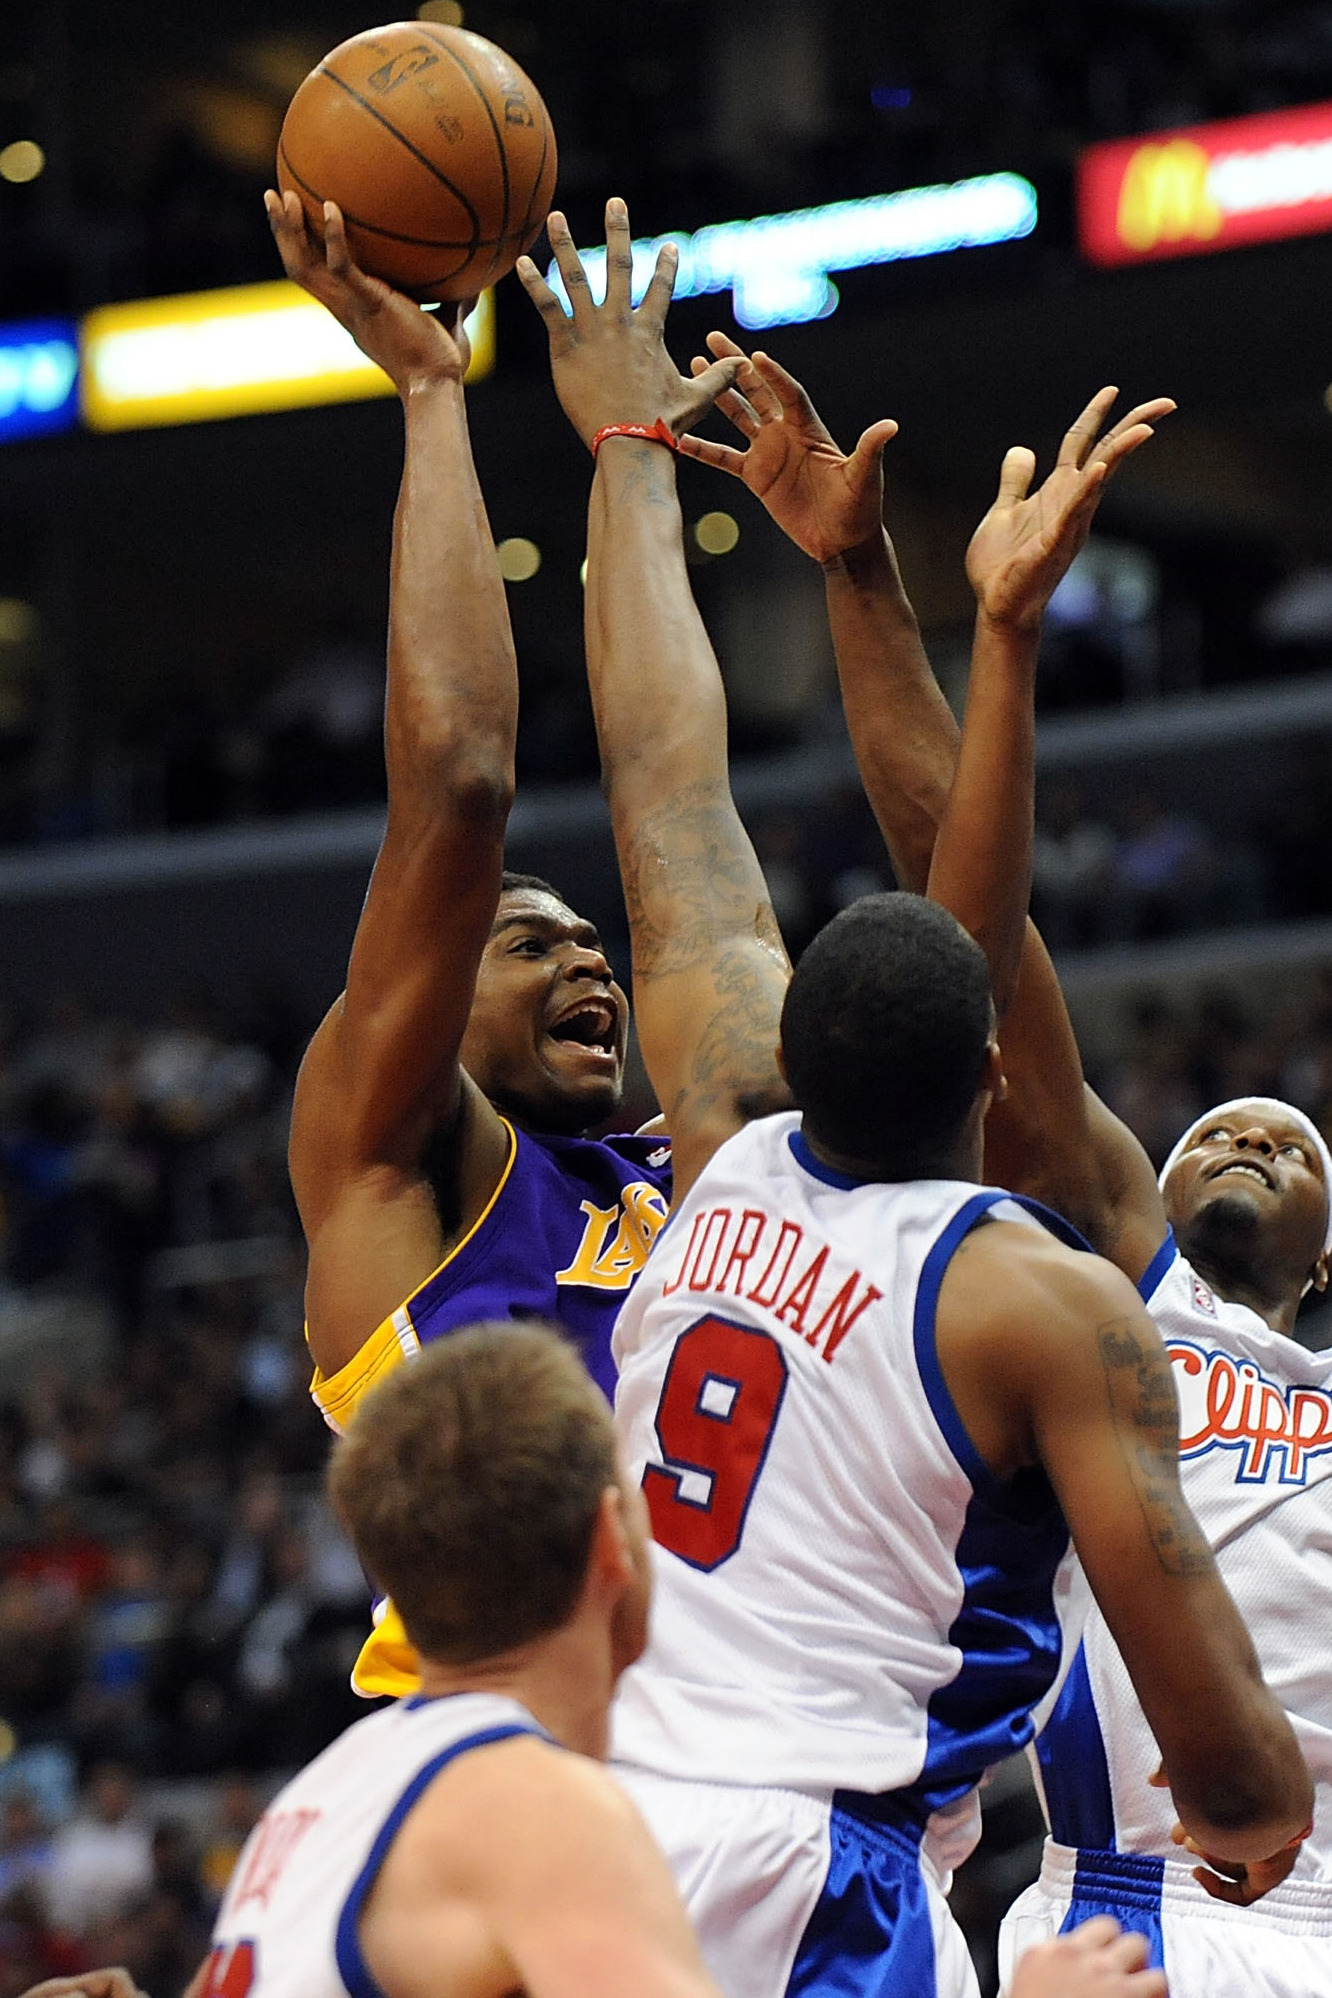 L.A. Lakers vs. L.A. Clippers: Andrew Bynum and 3 Young Stars to